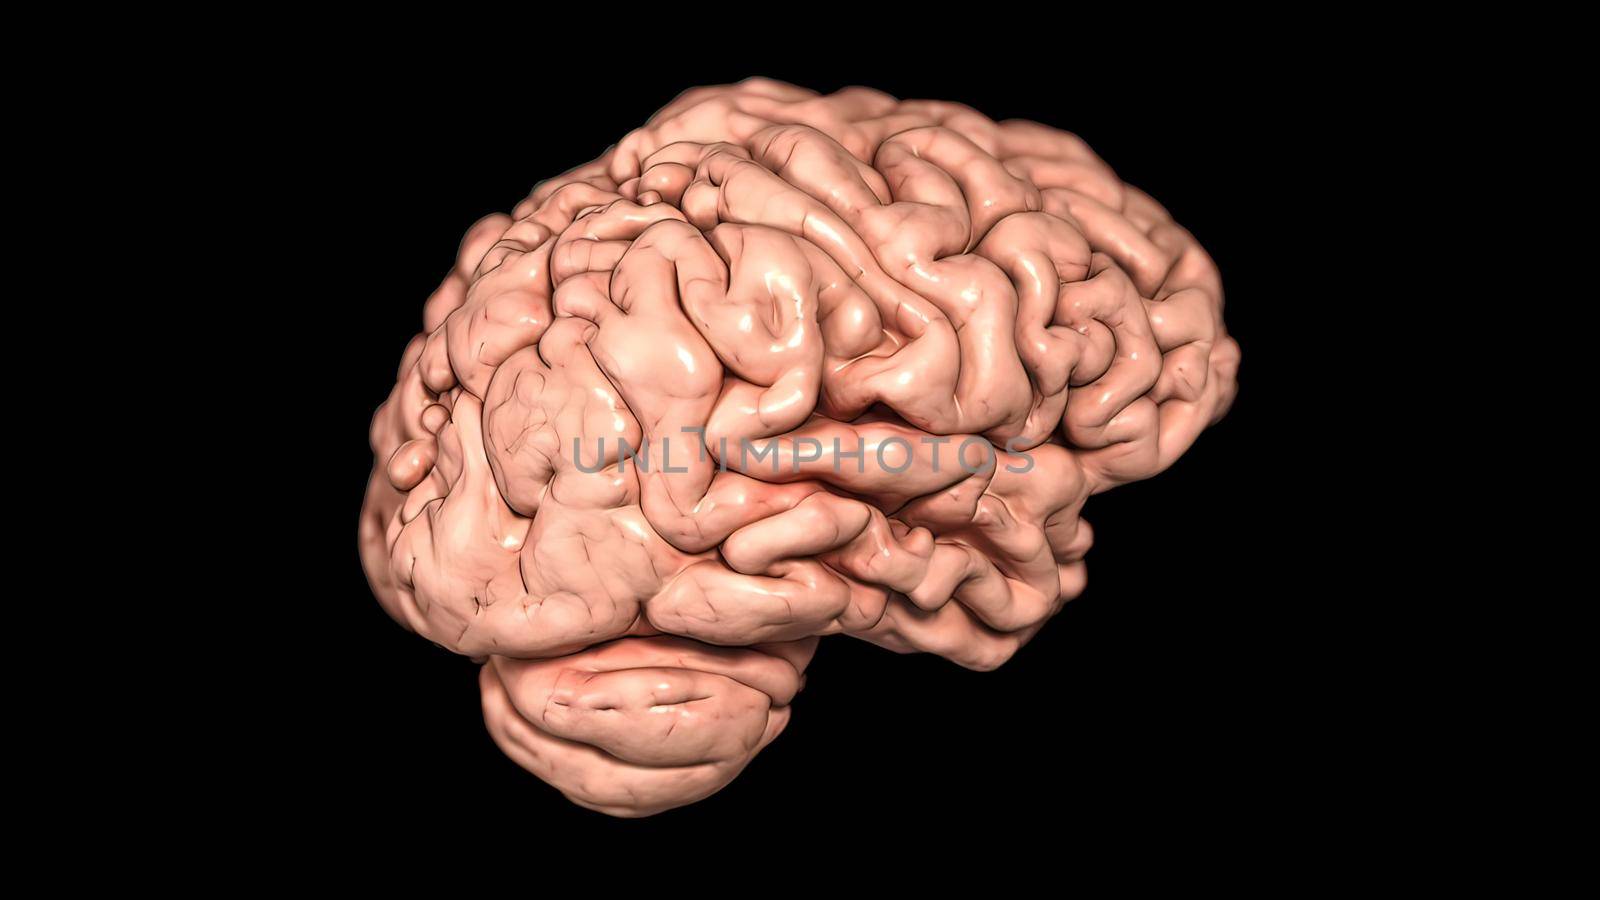 Rotating brain anatomy on black background. 3D medical illustration by creativepic